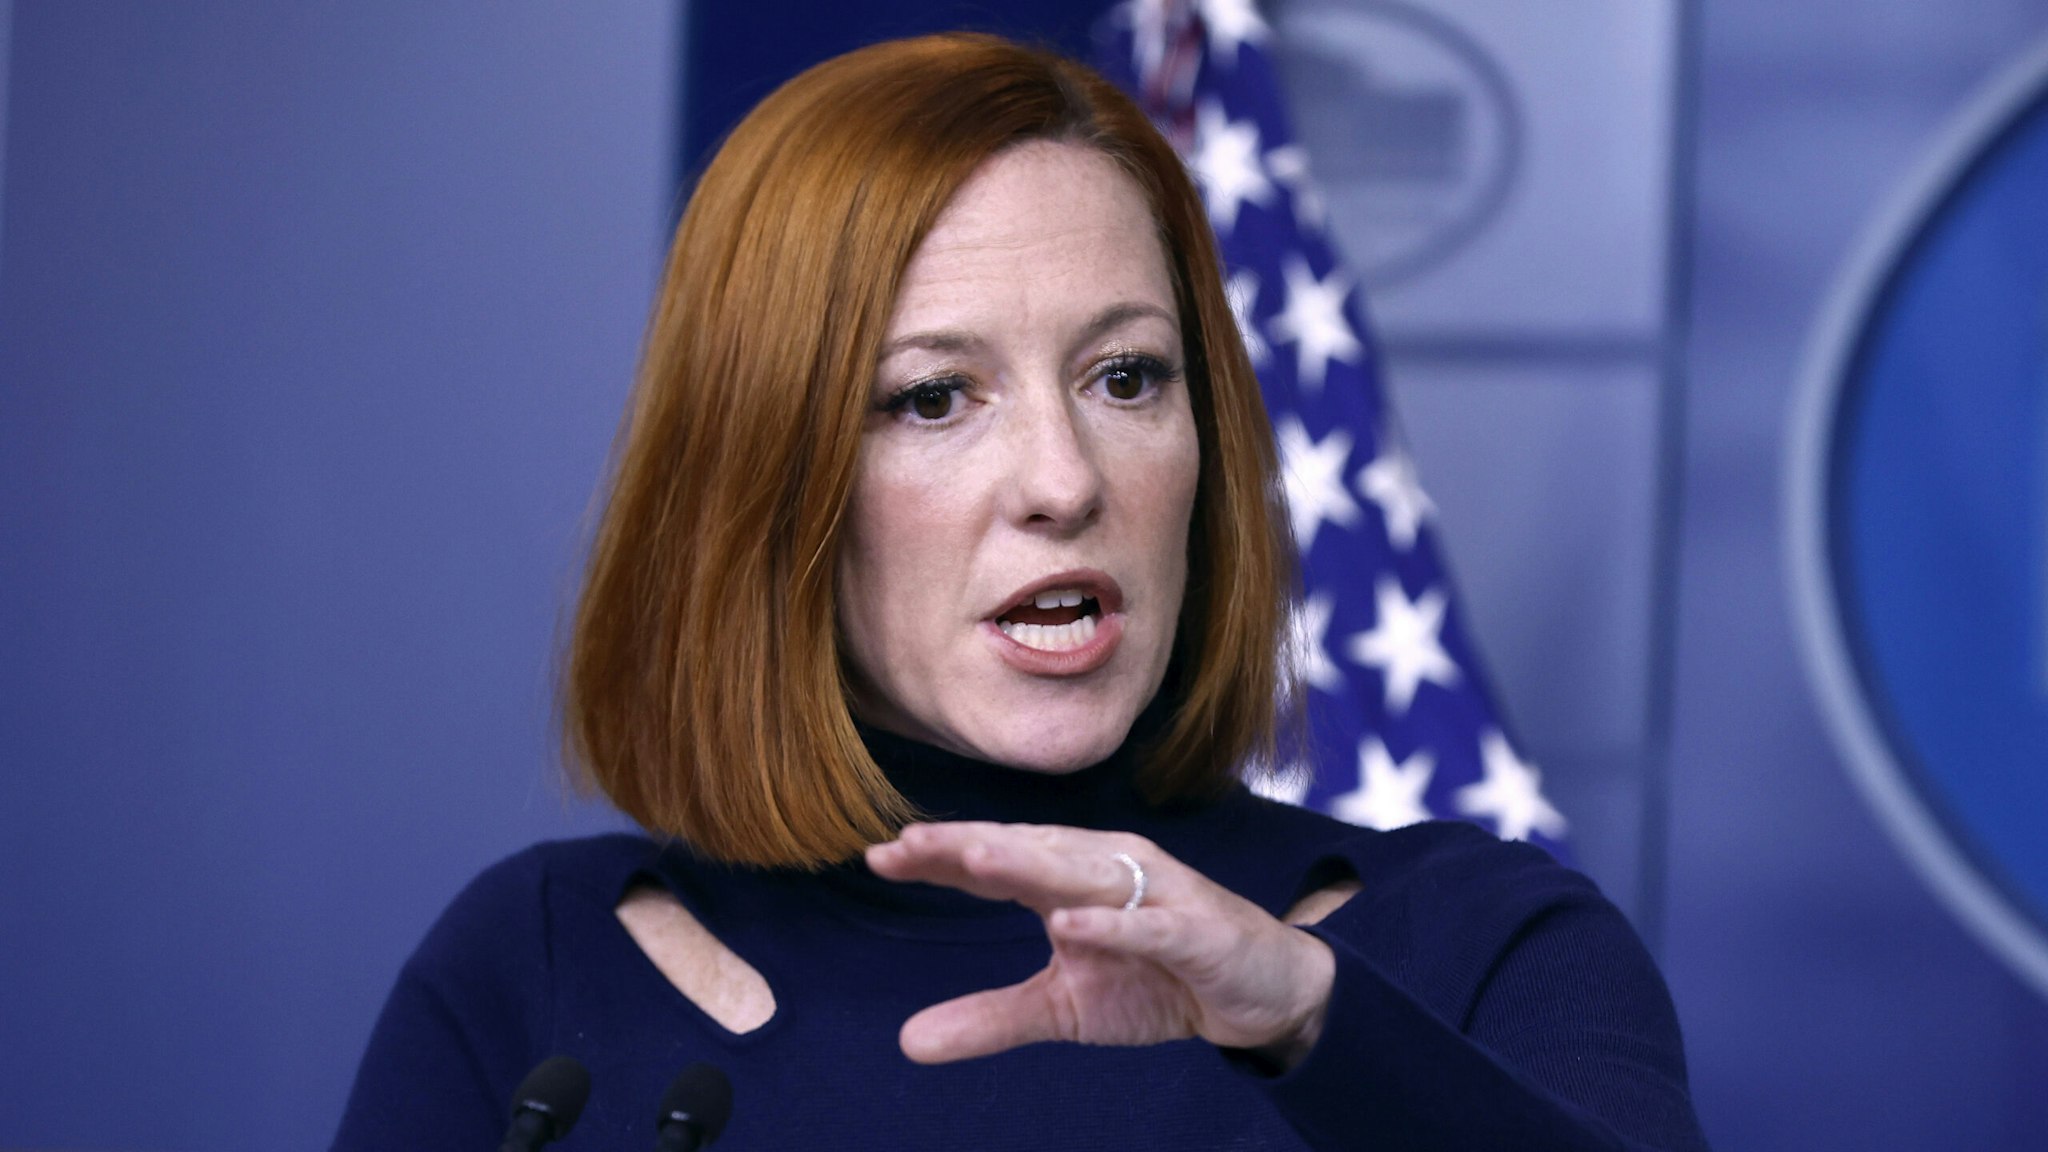 WASHINGTON, DC - DECEMBER 10: White House Press Secretary Jen Psaki speaks to reporters in the Brady Press Briefing Room at the White House on December 10, 2021 in Washington, DC. Psaki expanded on President Joe Biden's remarks about the economy and his belief that consumer prices and other costs will be going down as inflation eases next year.